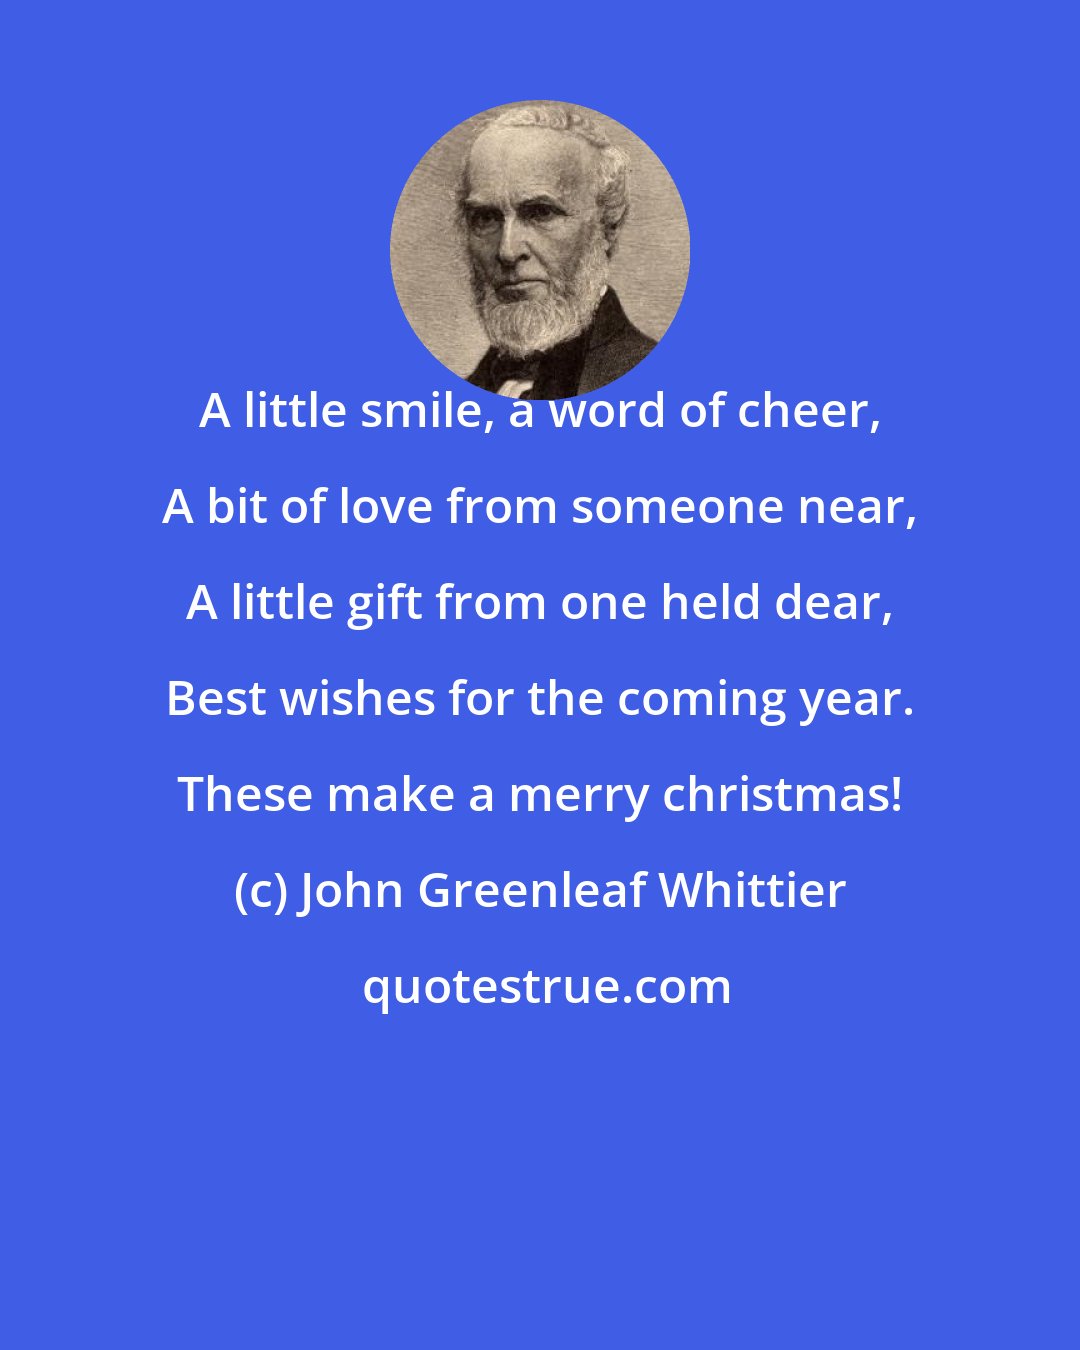 John Greenleaf Whittier: A little smile, a word of cheer, A bit of love from someone near, A little gift from one held dear, Best wishes for the coming year. These make a merry christmas!